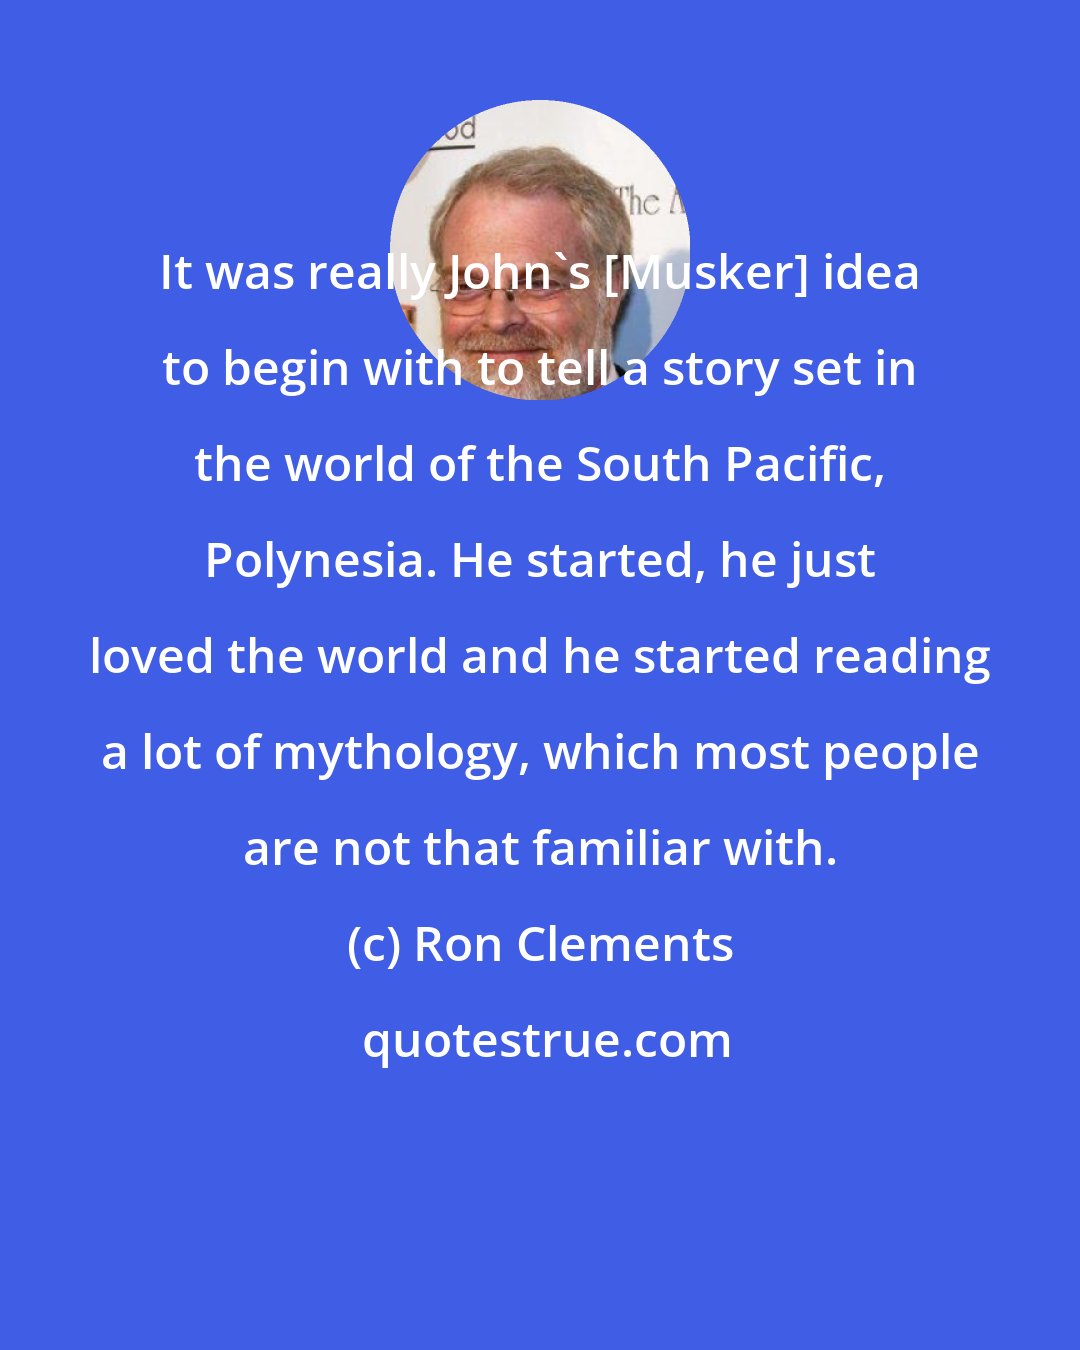 Ron Clements: It was really John's [Musker] idea to begin with to tell a story set in the world of the South Pacific, Polynesia. He started, he just loved the world and he started reading a lot of mythology, which most people are not that familiar with.